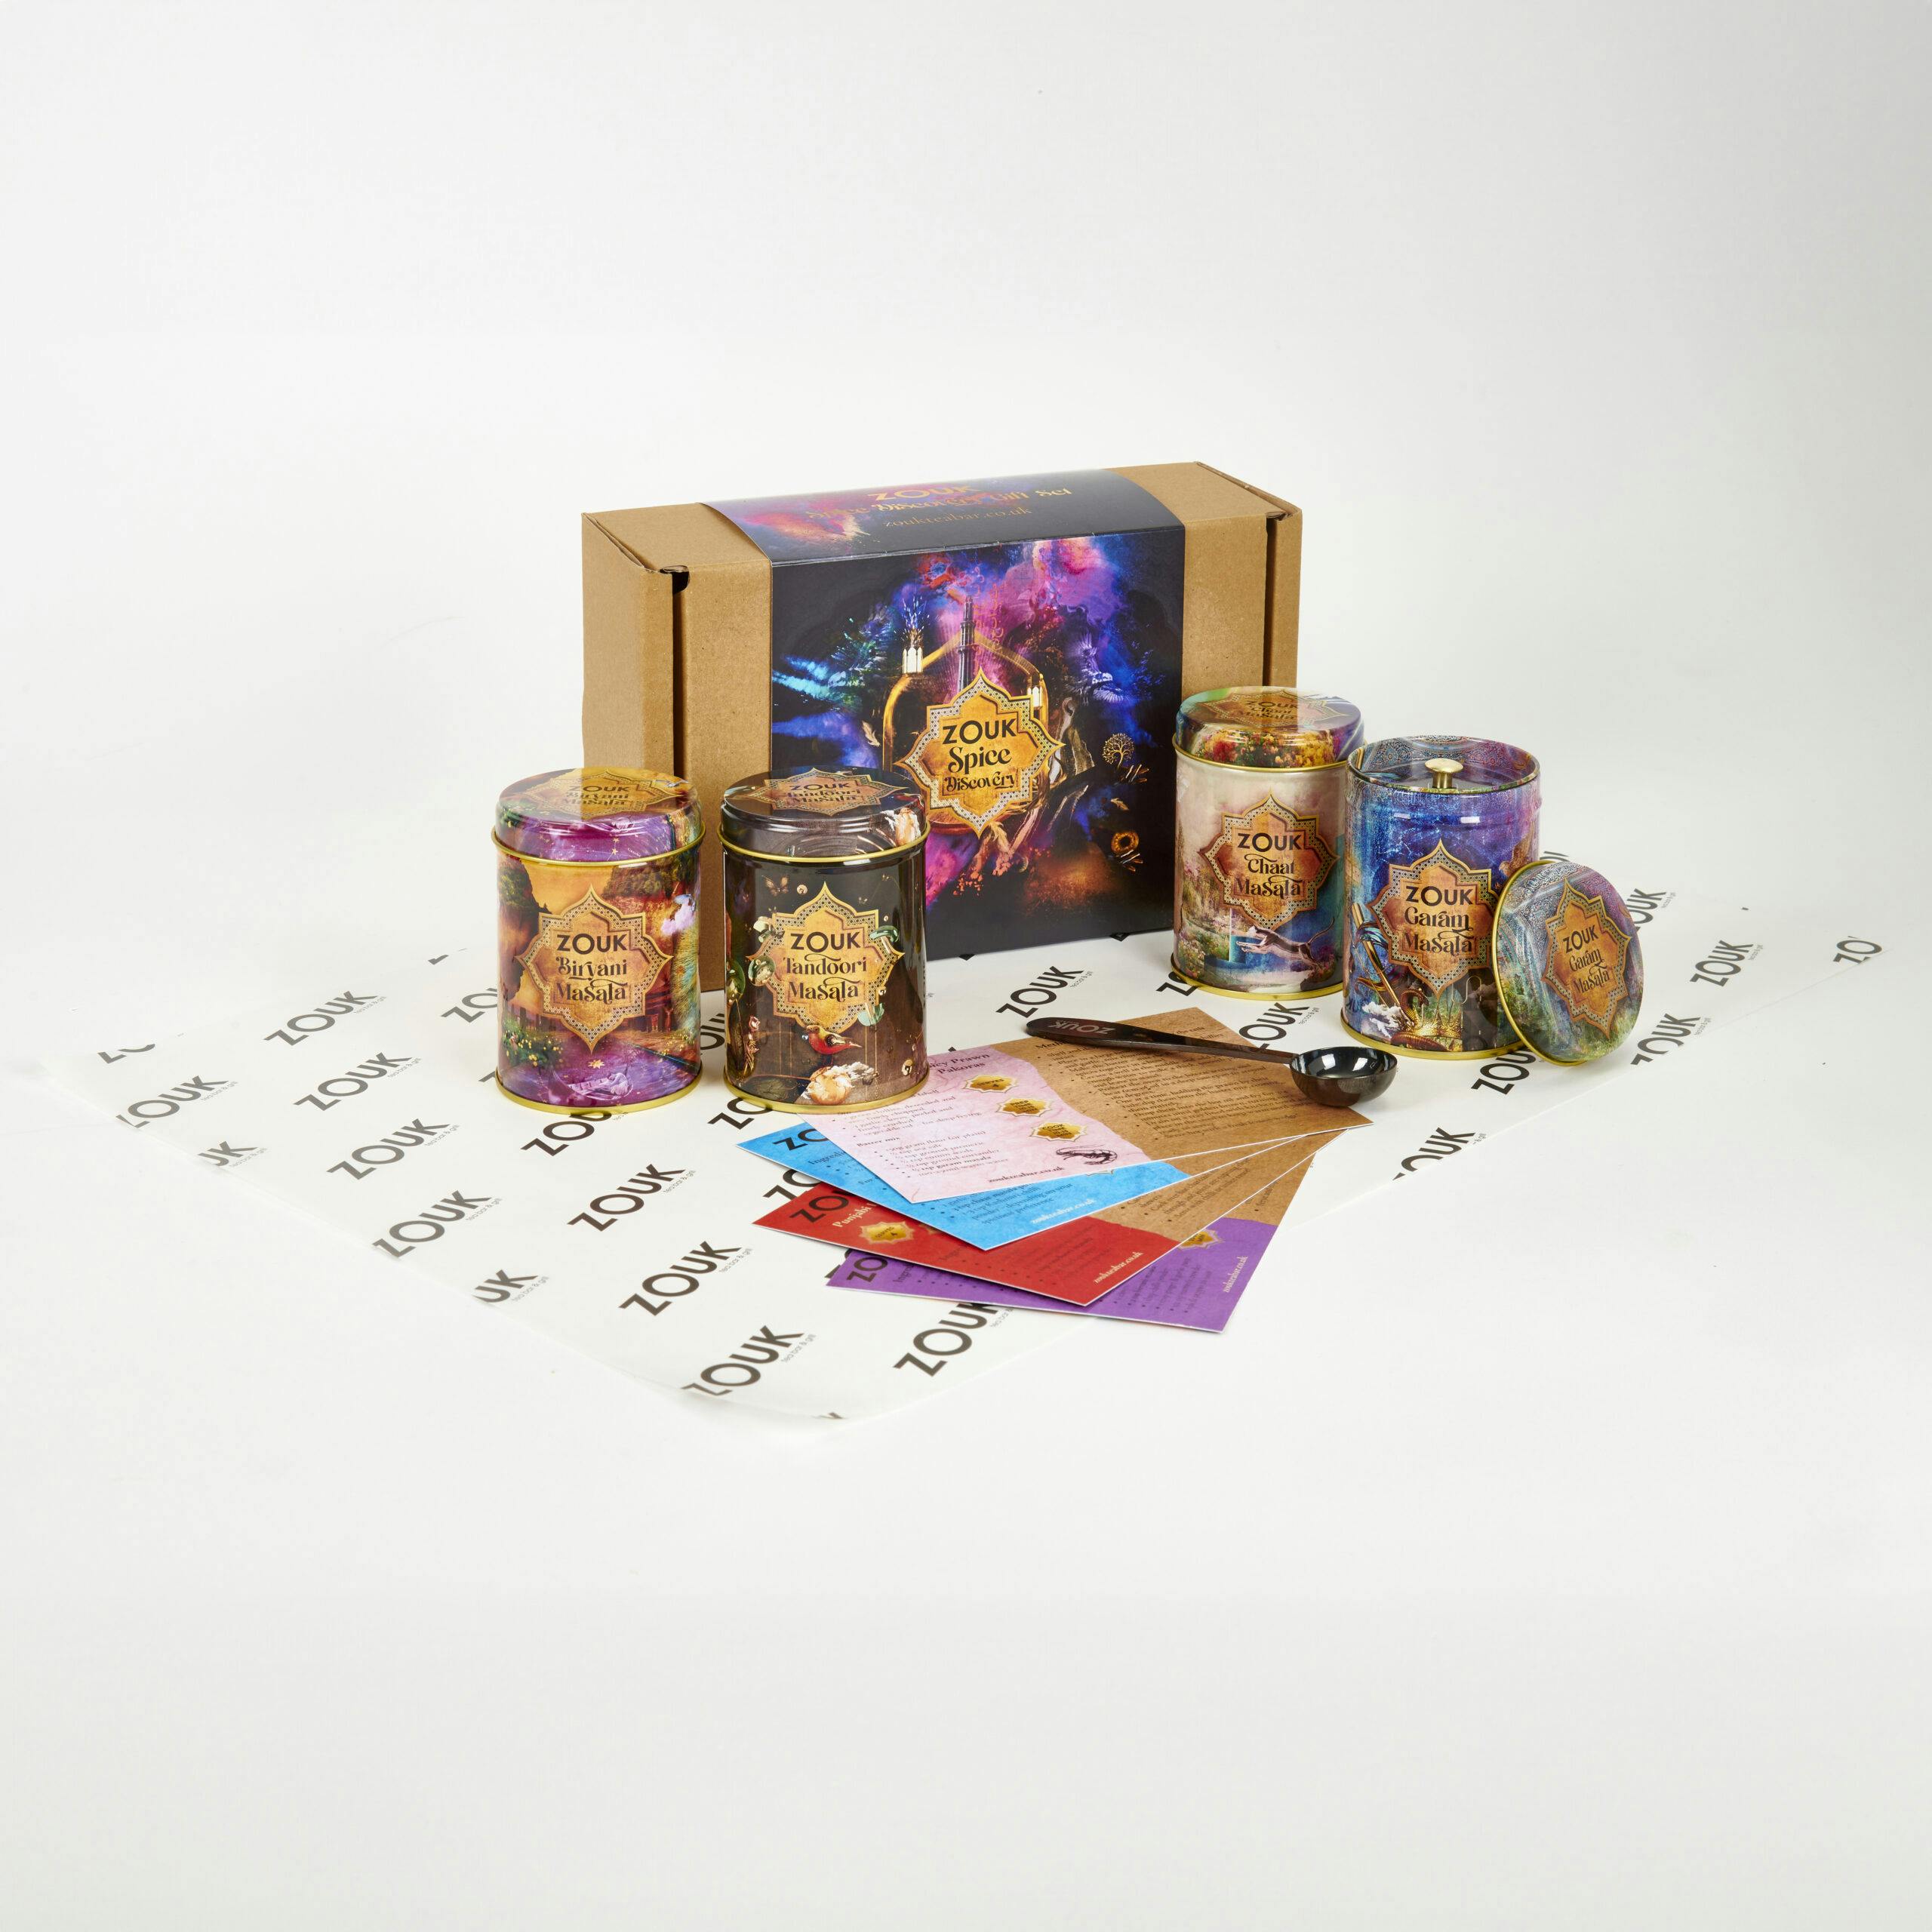 Zouk's Spice Discovery Kit Components Outside the Box